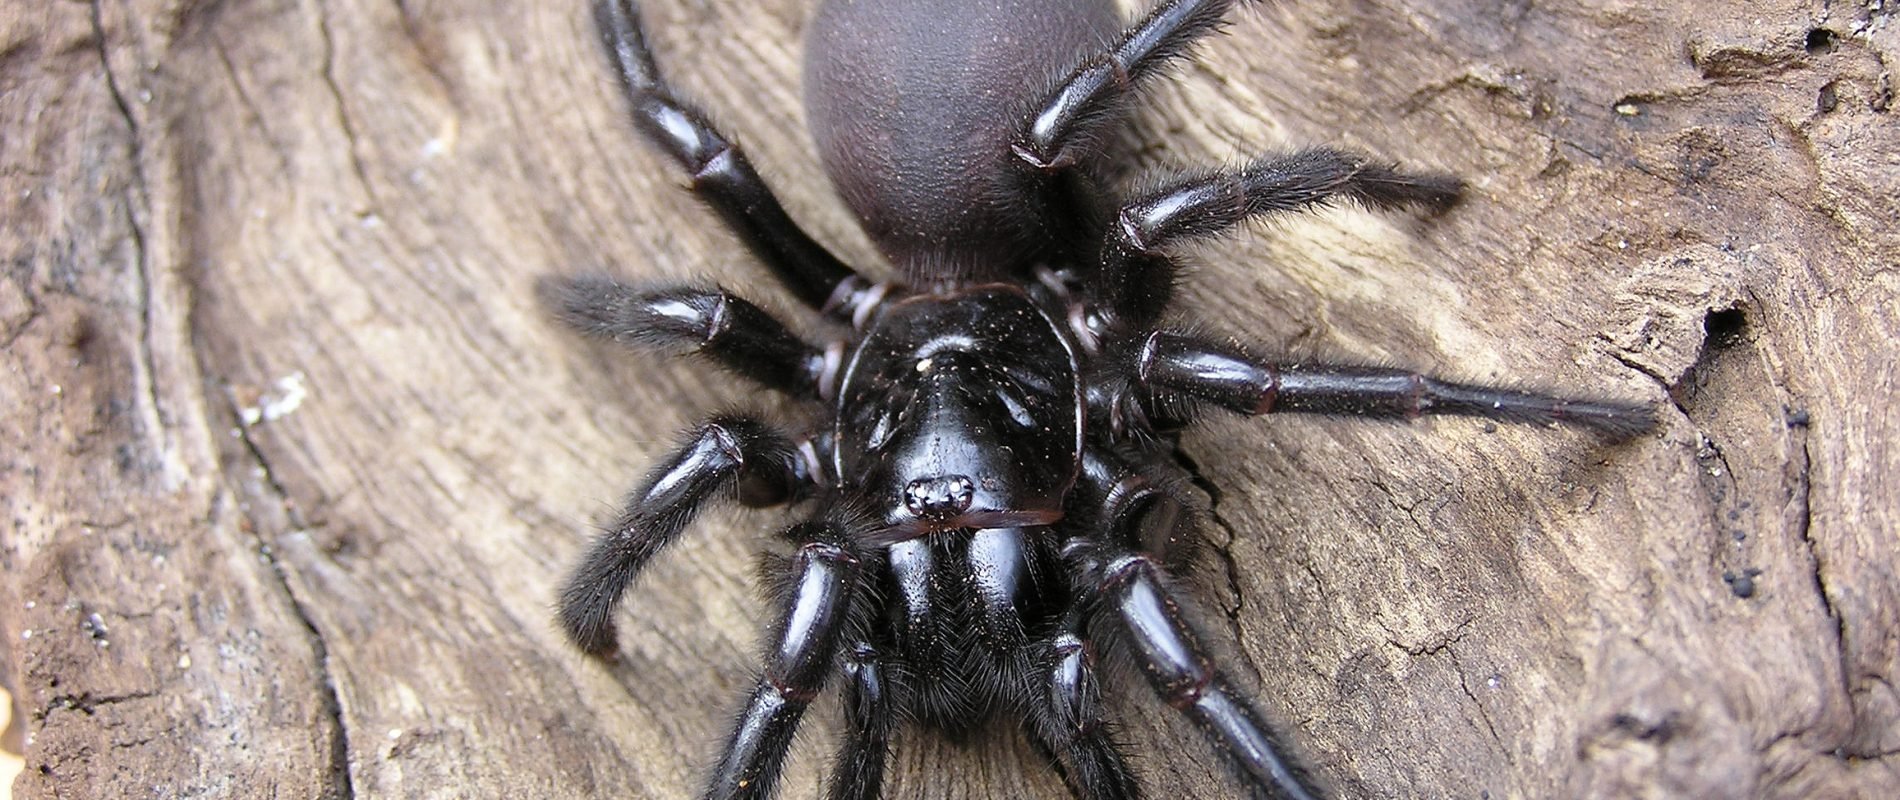 The 10 most dangerous animals in Australia (spiders, snakes...)